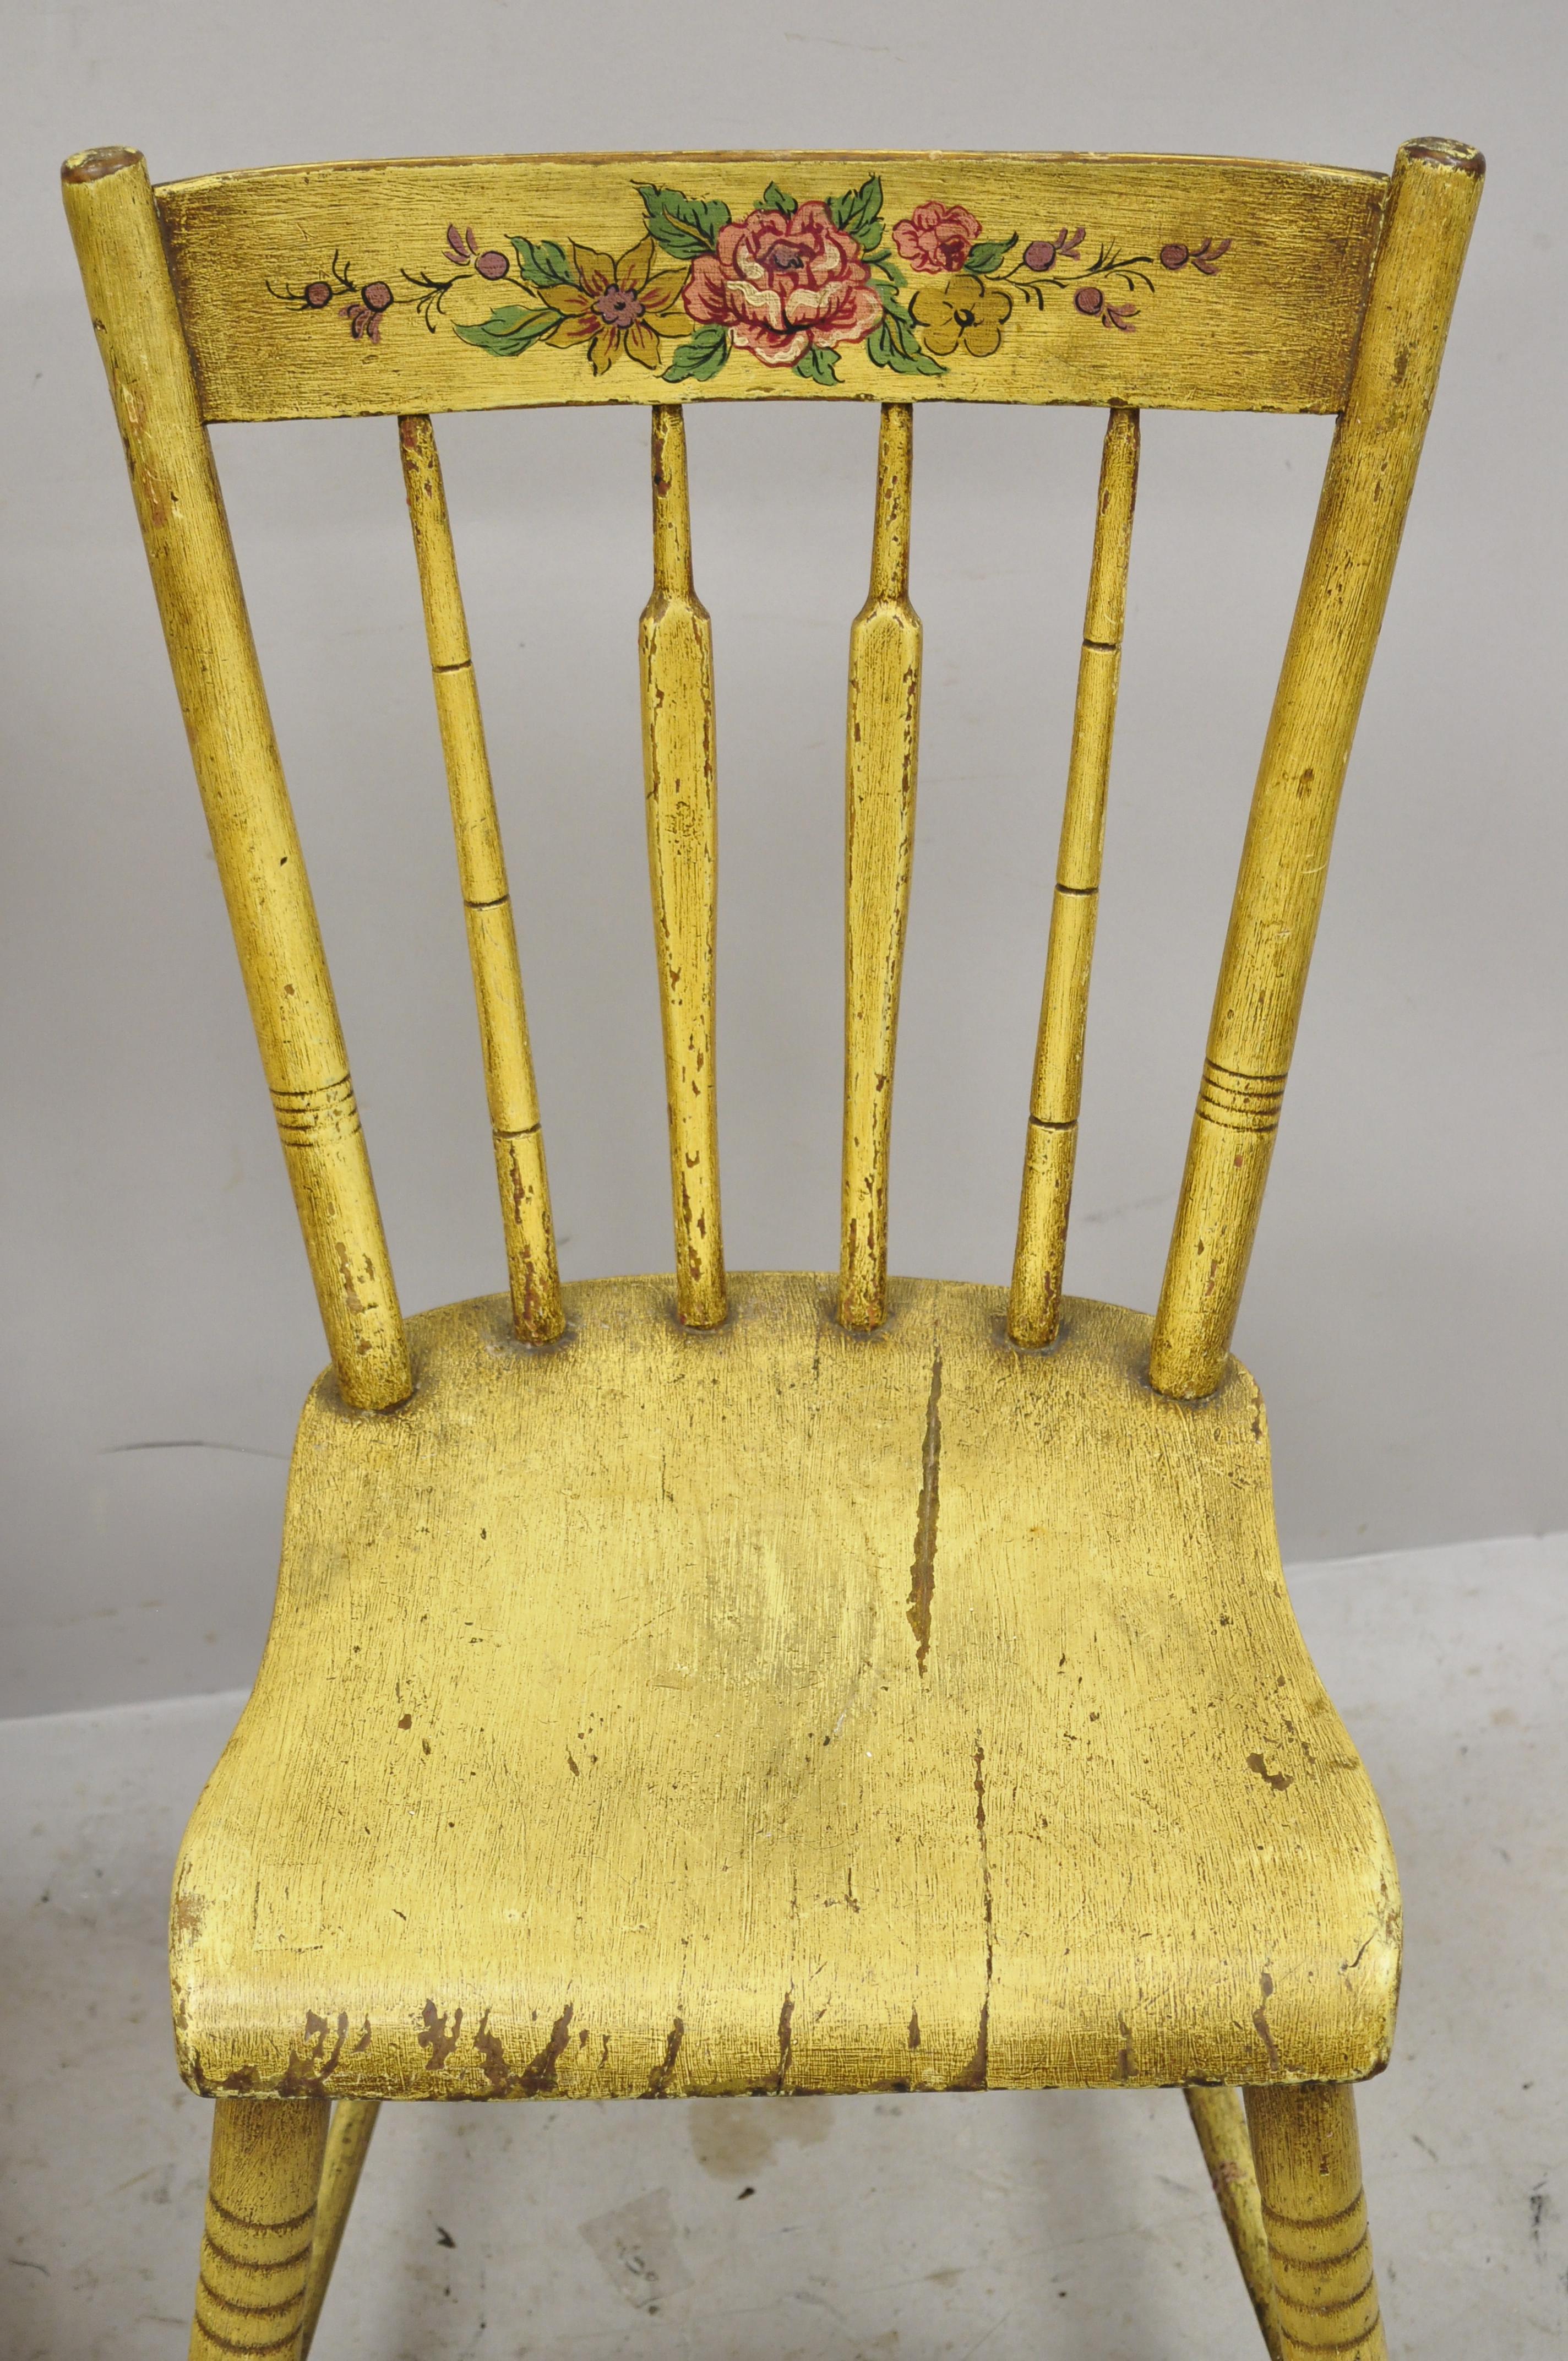 Frederick Loeser & Co Yellow Primitive Hitchcock Style Side Chairs, Pair 'B' In Good Condition For Sale In Philadelphia, PA